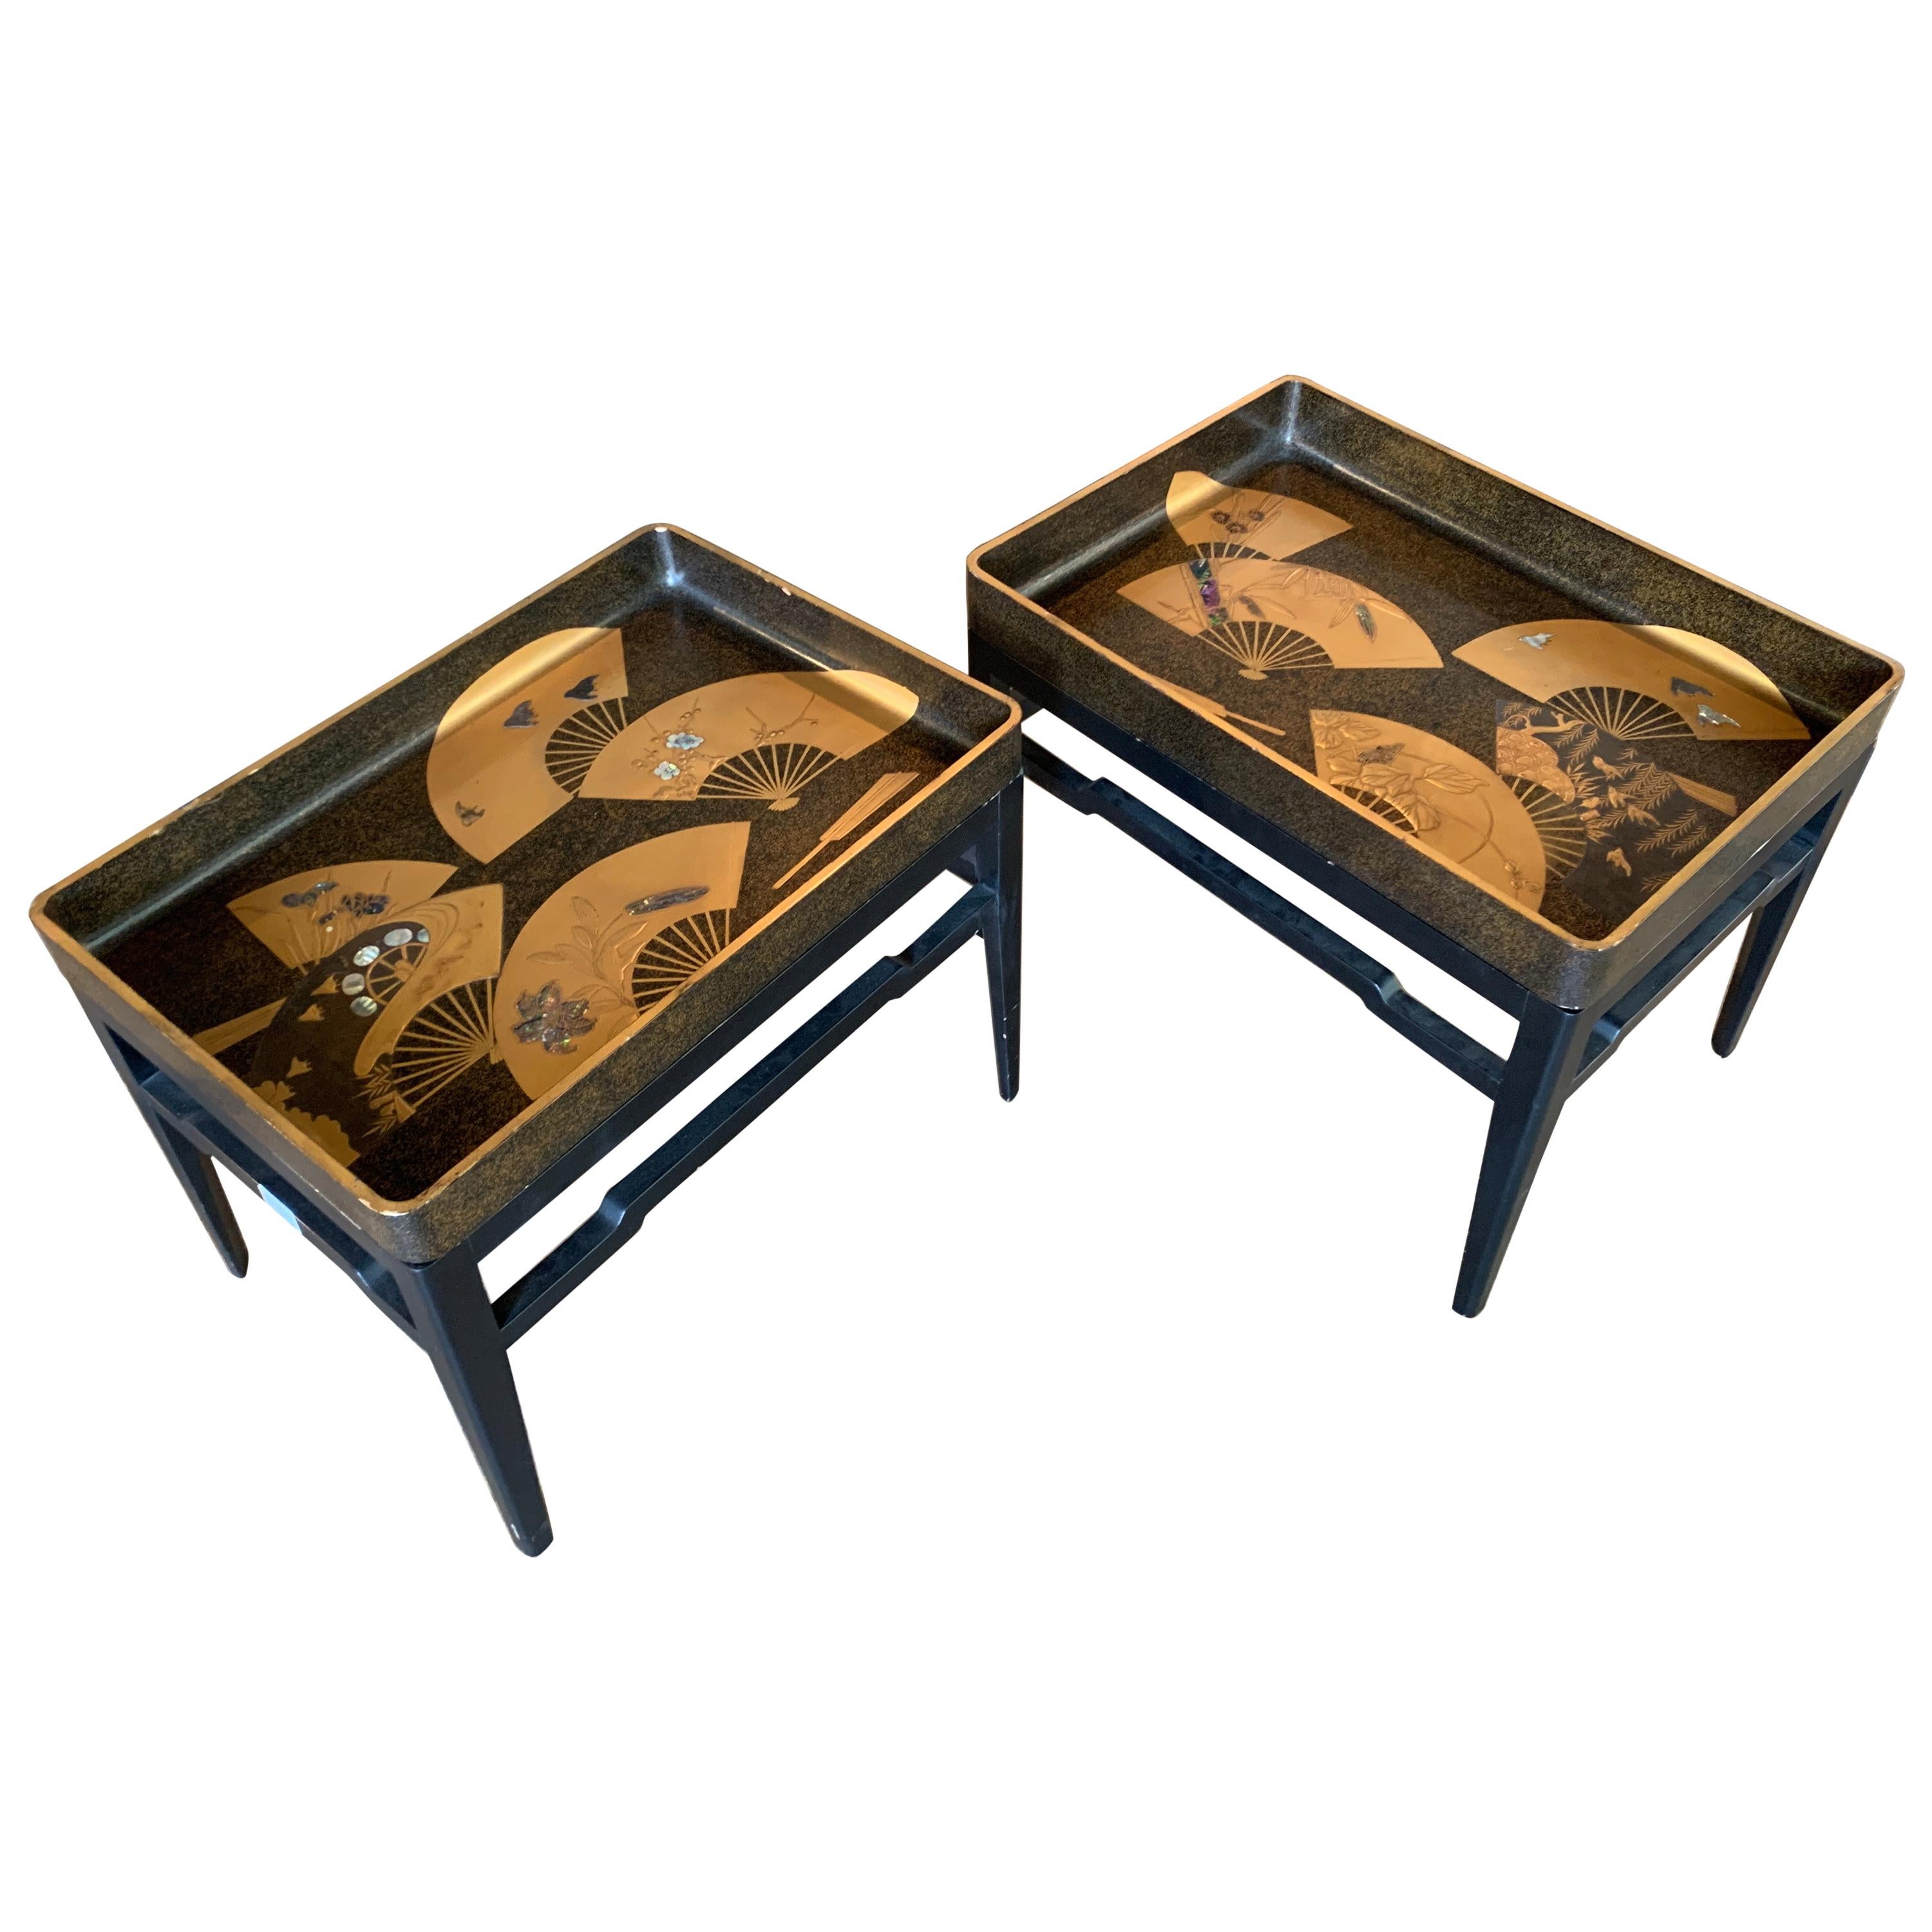 Pair of Japanese Embellished Lacquer Tray Tables Meiji Period, Late 19th Century